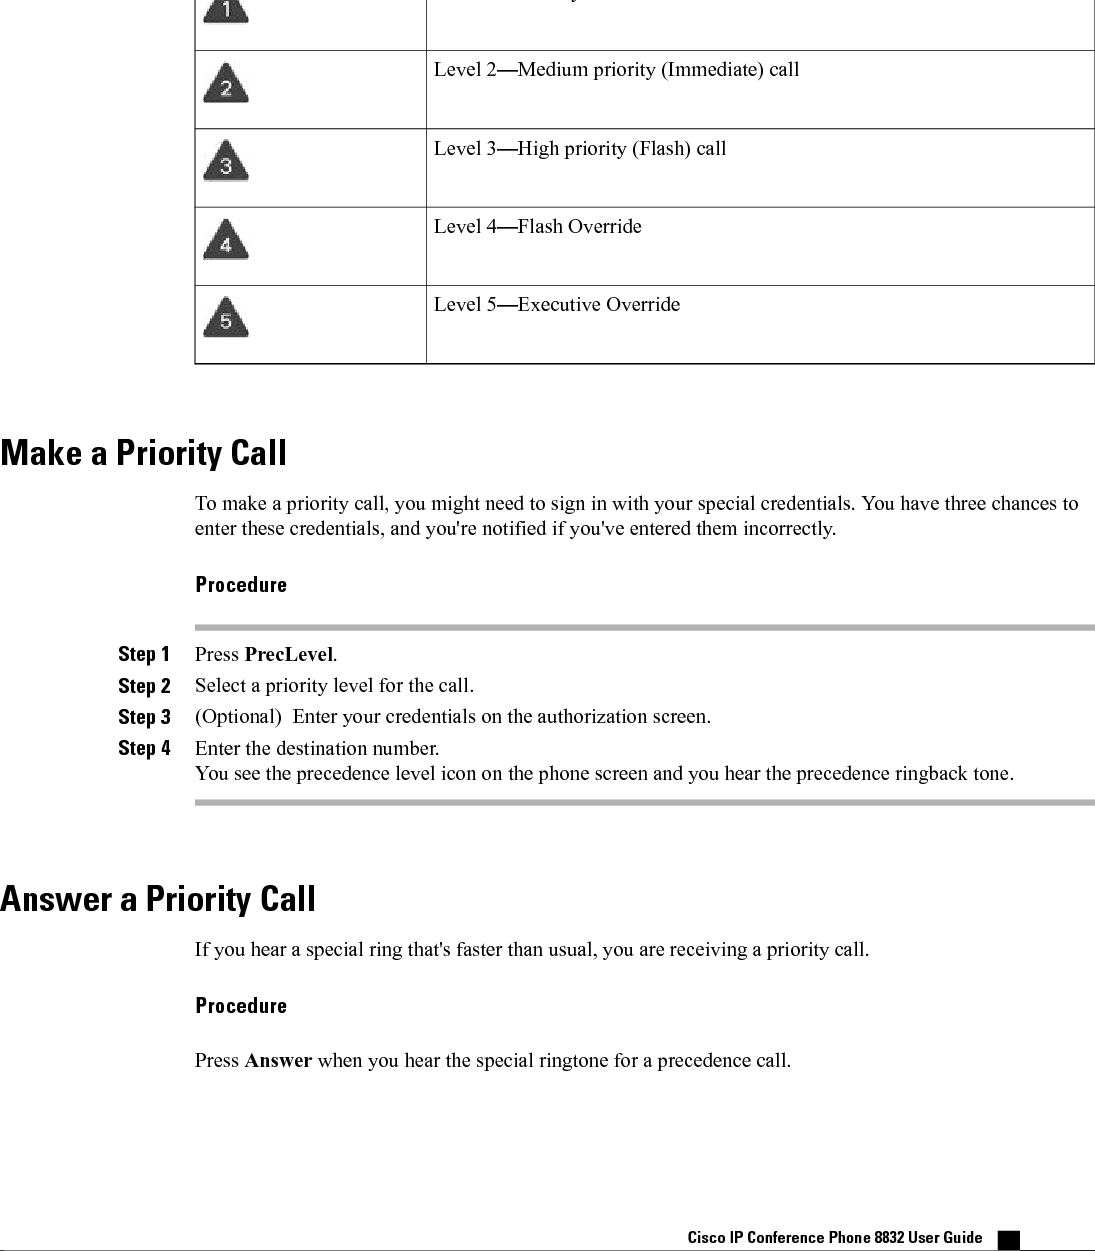 •Use call pickup to answer the call.Table 1: Multilevel Precedence and Preemption Priority LevelsPriority LevelMLPP iconLevel 1—Priority callLevel 2—Medium priority (Immediate) callLevel 3—High priority (Flash) callLevel 4—Flash OverrideLevel 5—Executive OverrideMake a Priority CallTo make a priority call, you might need to sign in with your special credentials. You have three chances toenter these credentials, and you&apos;re notified if you&apos;ve entered them incorrectly.ProcedureStep 1 Press PrecLevel.Step 2 Select a priority level for the call.Step 3 (Optional) Enter your credentials on the authorization screen.Step 4 Enter the destination number.You see the precedence level icon on the phone screen and you hear the precedence ringback tone.Answer a Priority CallIf you hear a special ring that&apos;s faster than usual, you are receiving a priority call.ProcedurePress Answer when you hear the special ringtone for a precedence call.Cisco IP Conference Phone 8832 User Guide    25CallsMake a Priority CallREVIEW DRAFT - CISCO CONFIDENTIAL